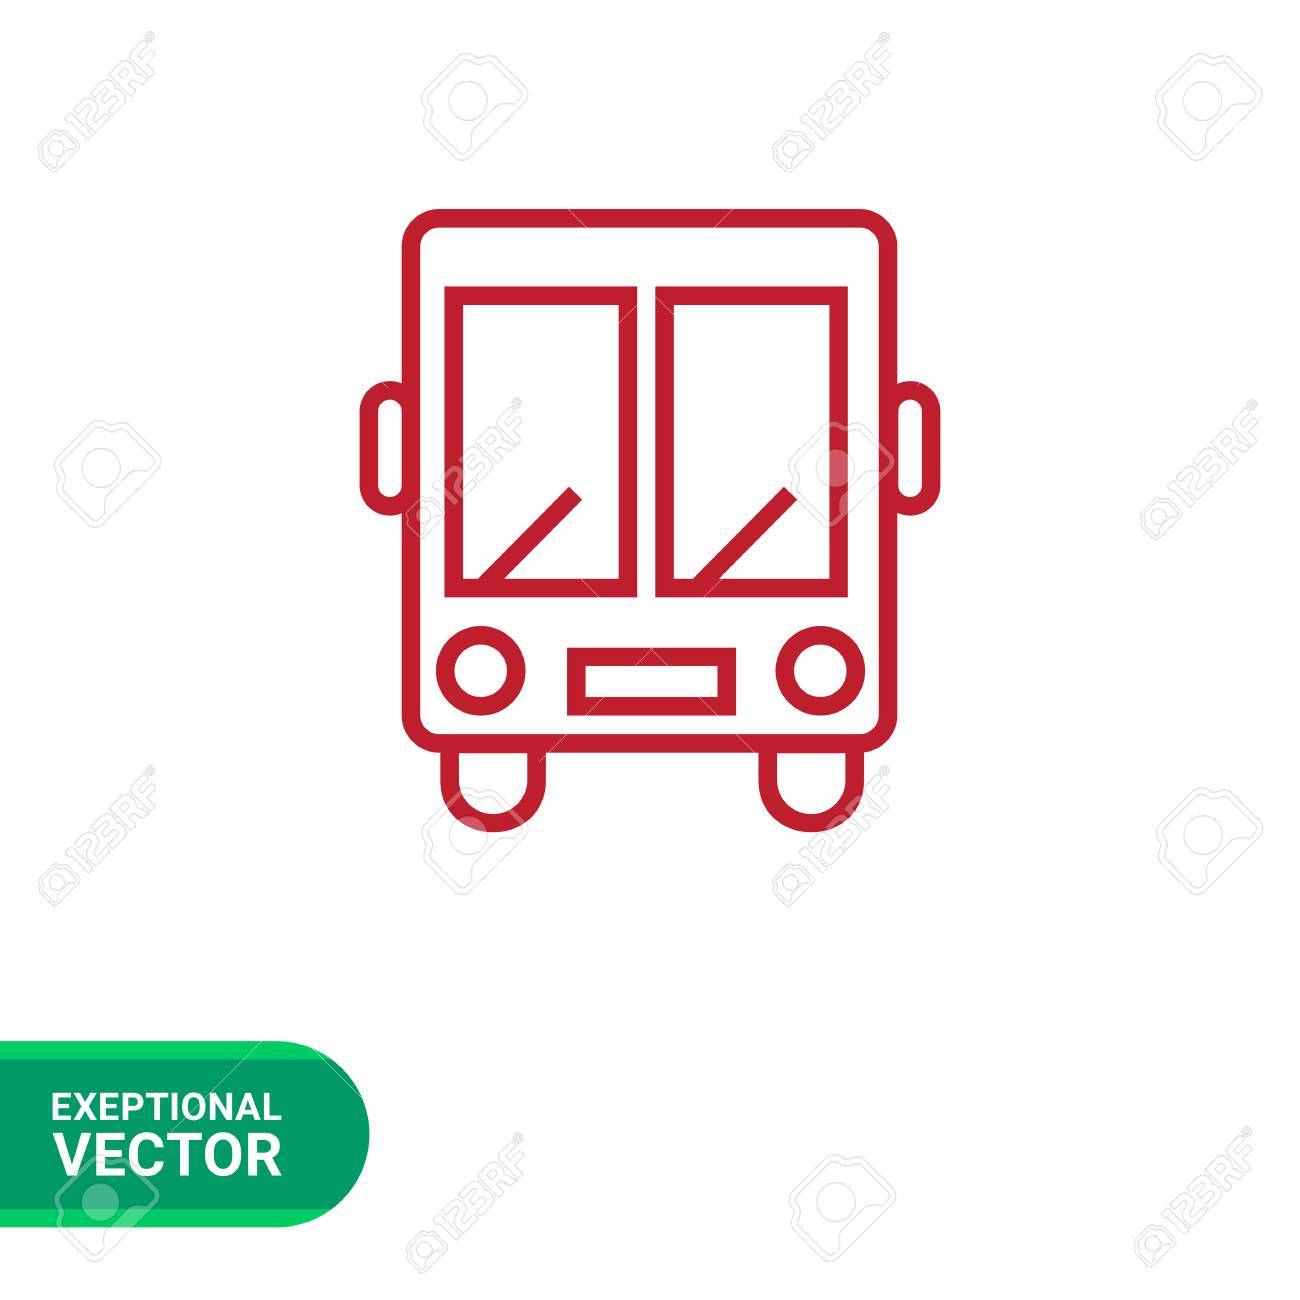 Traditional School Bus (Buses) Icon #118373  Icons Etc